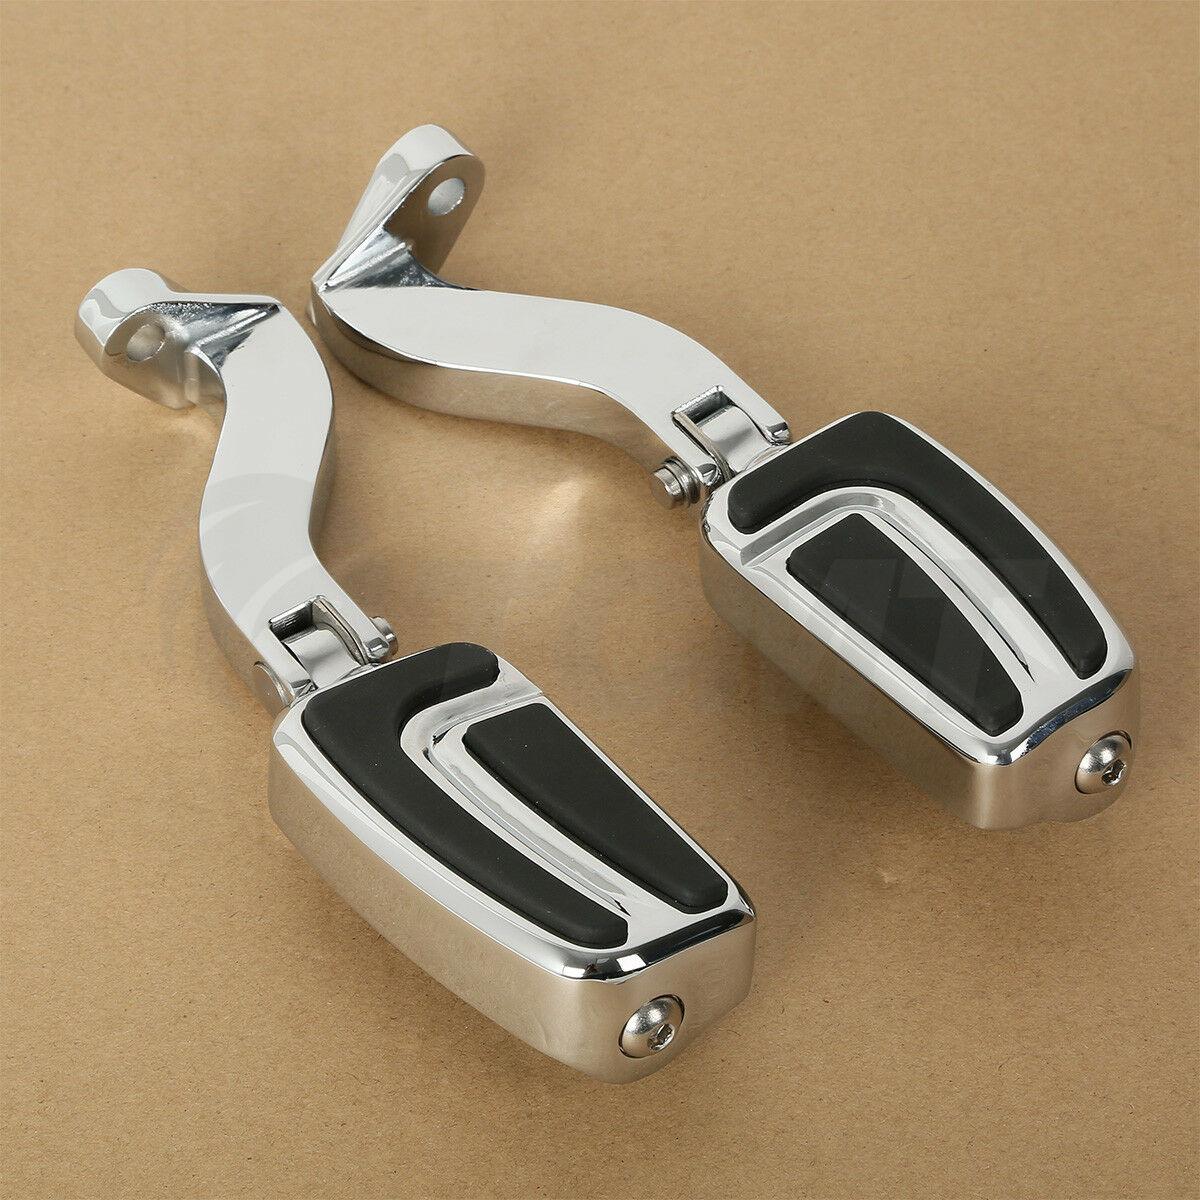 Chrome Passenger Mounts & Pegs Fit For Harley Electra Glide Road King 1993-2022 - Moto Life Products